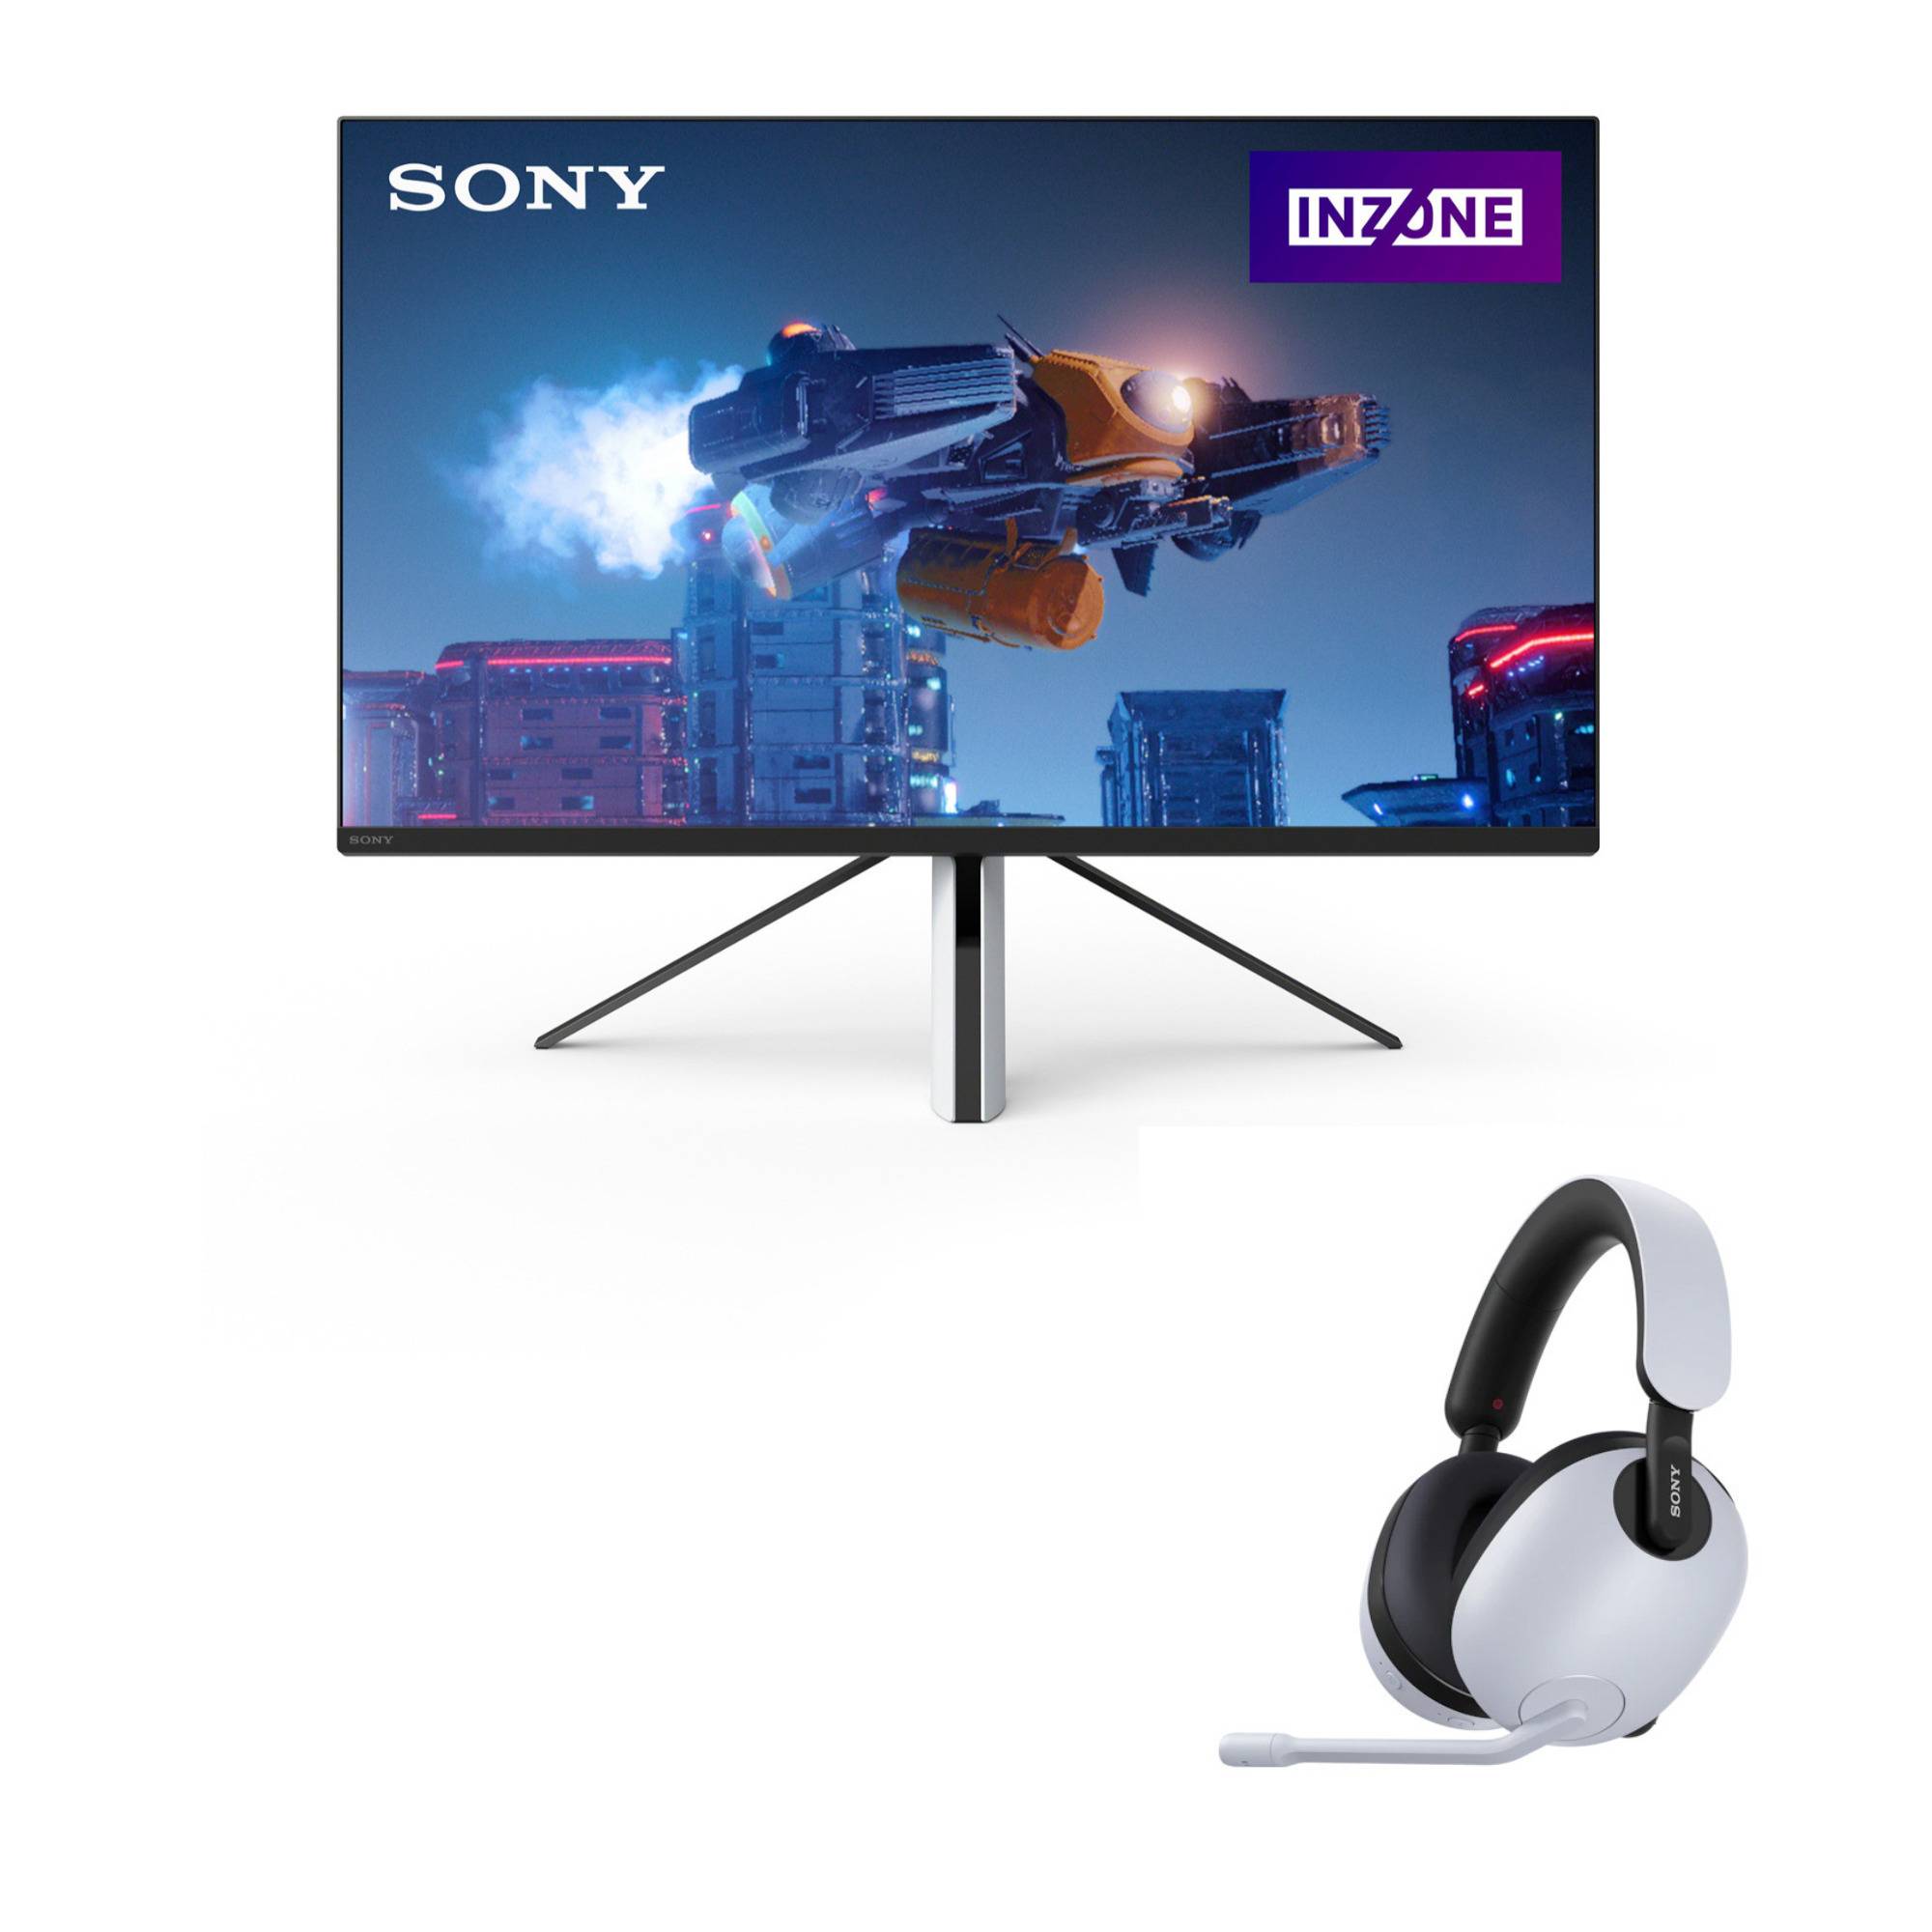 Sony 27-inch INZONE M3 Full HD HDR 240Hz Gaming Monitor with INZONE H7 Wireless Gaming Headset